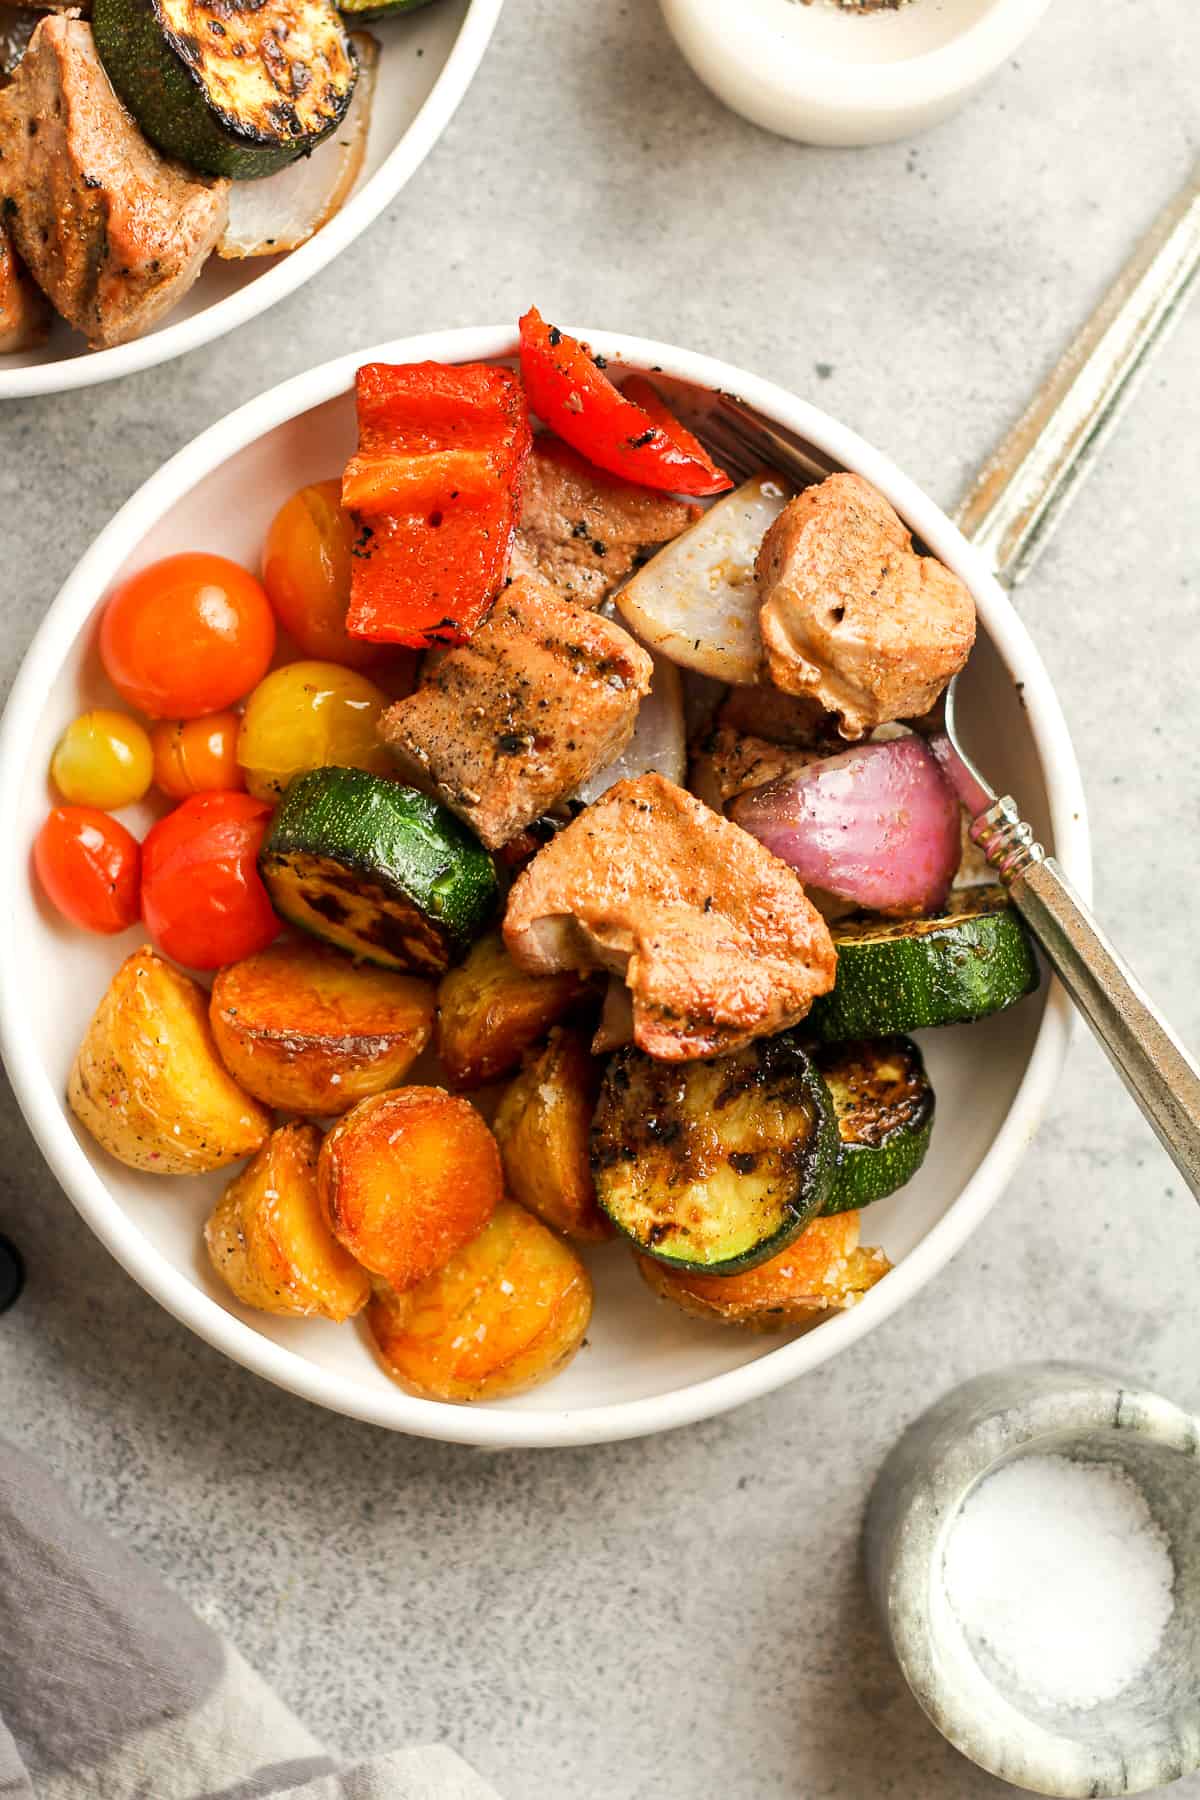 A bowl of the pork and veggies with a fork.